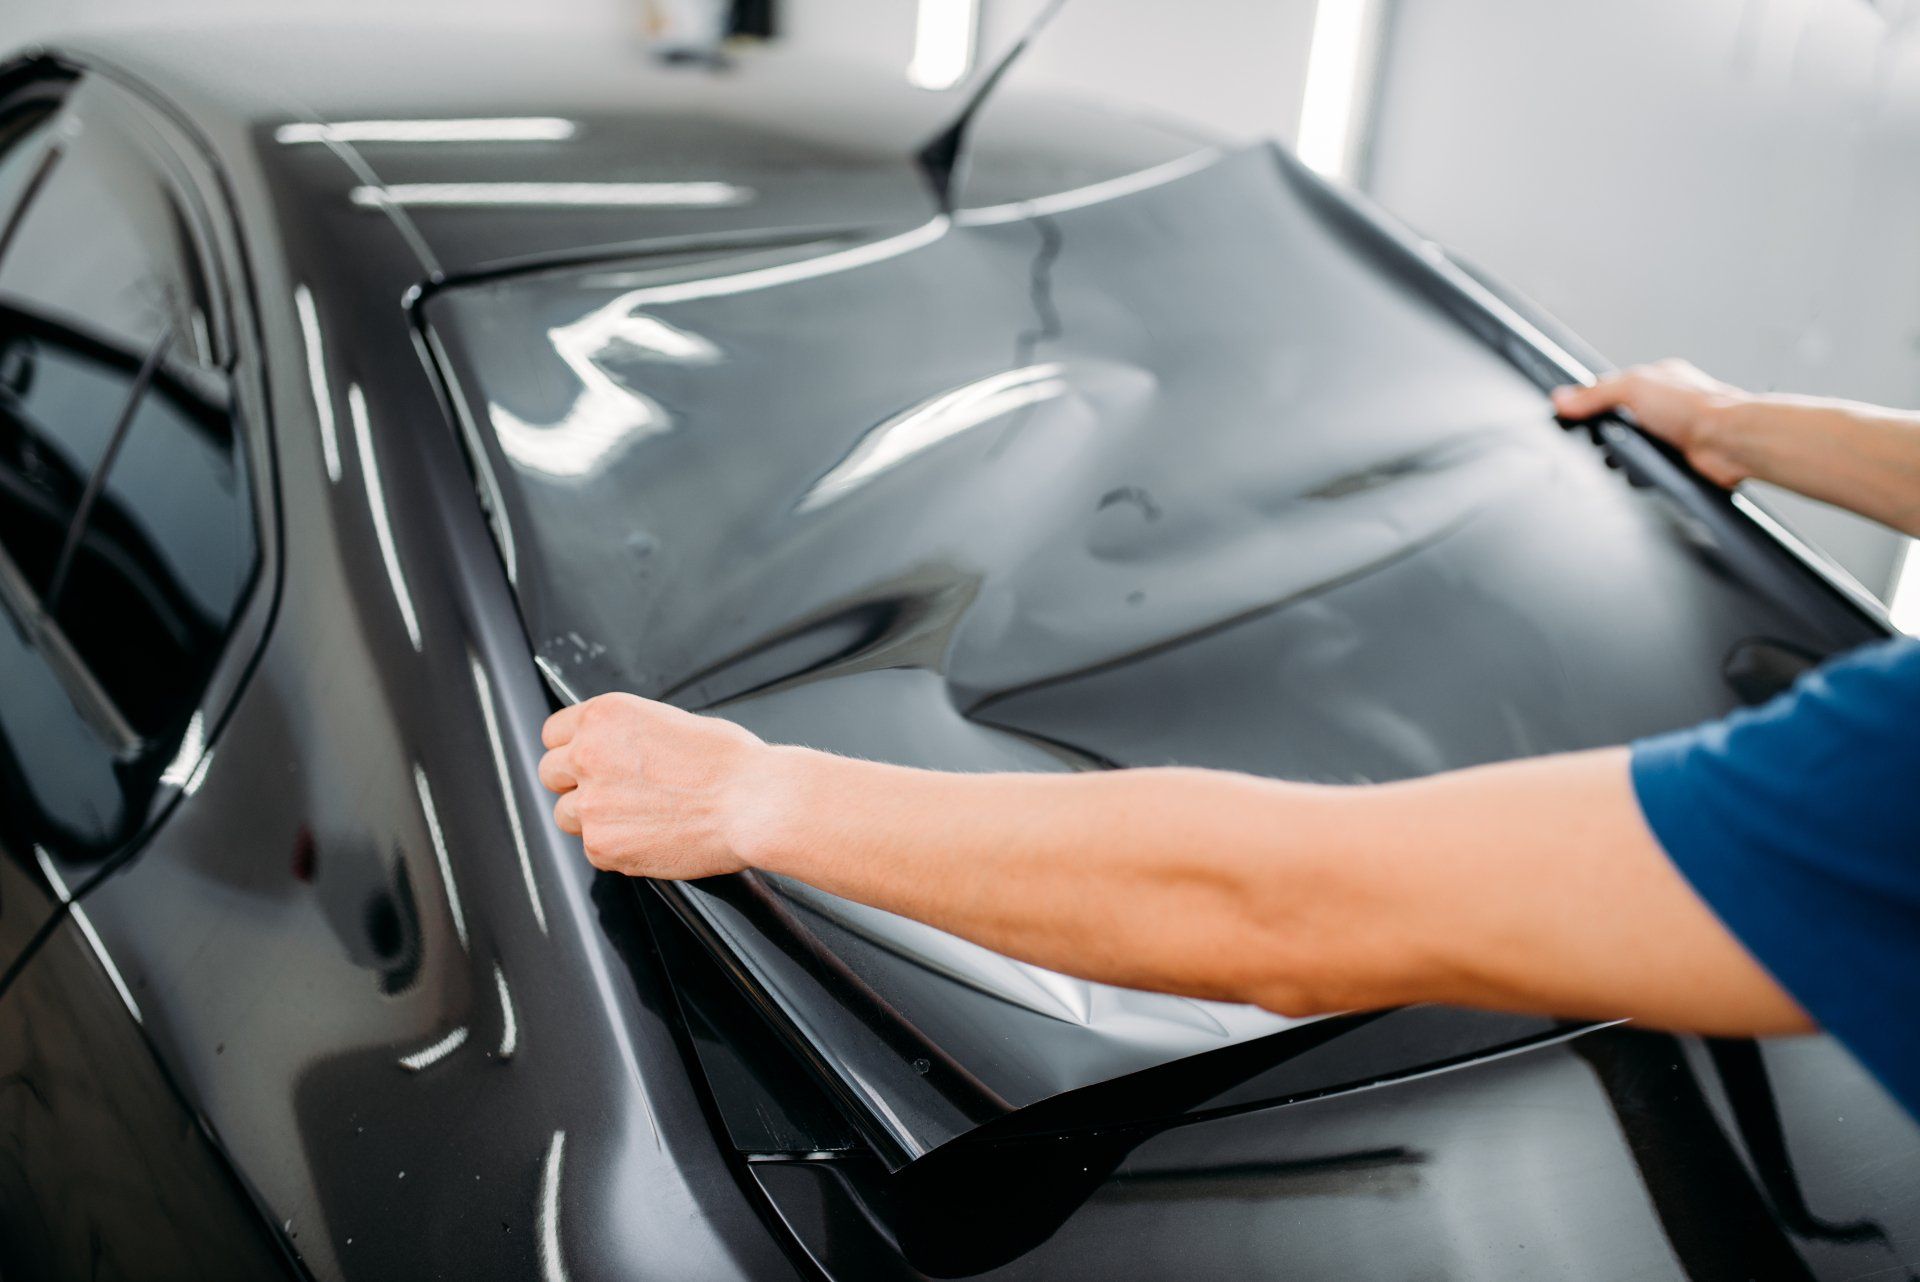 How to Choose the Best Window Tint Percentage for Your Car